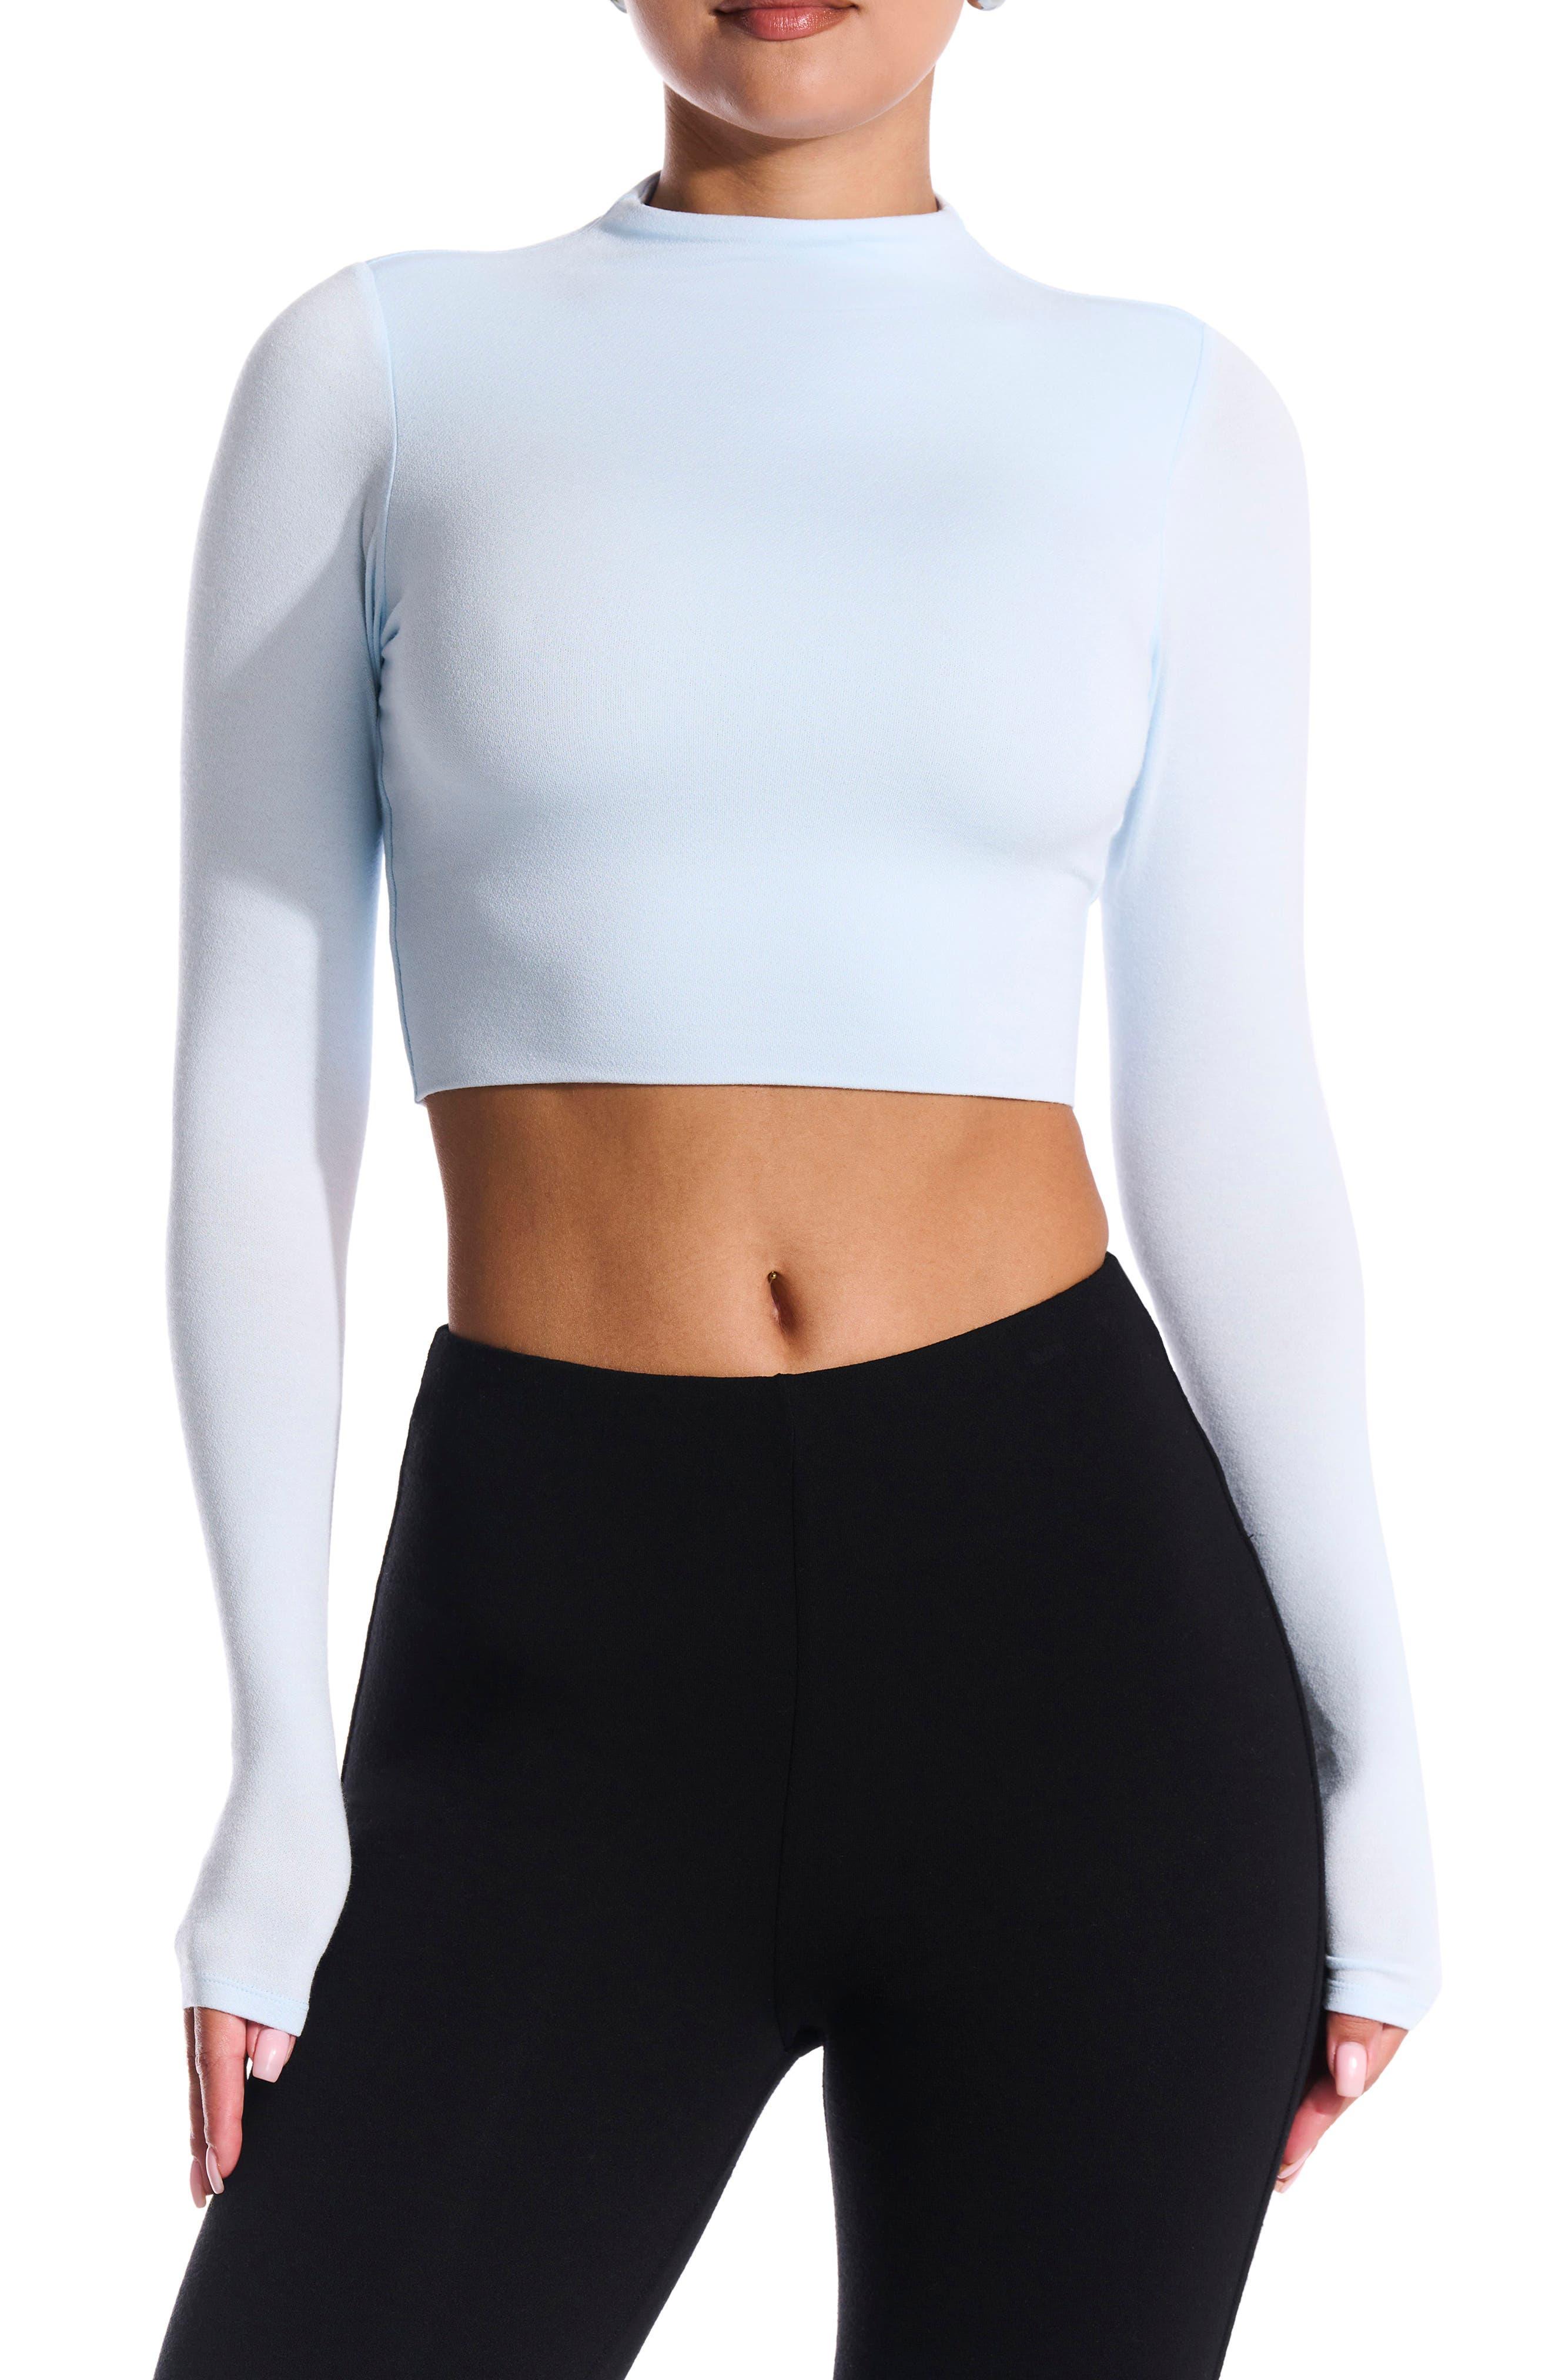 Naked Wardrobe The Nw Crop Top in White